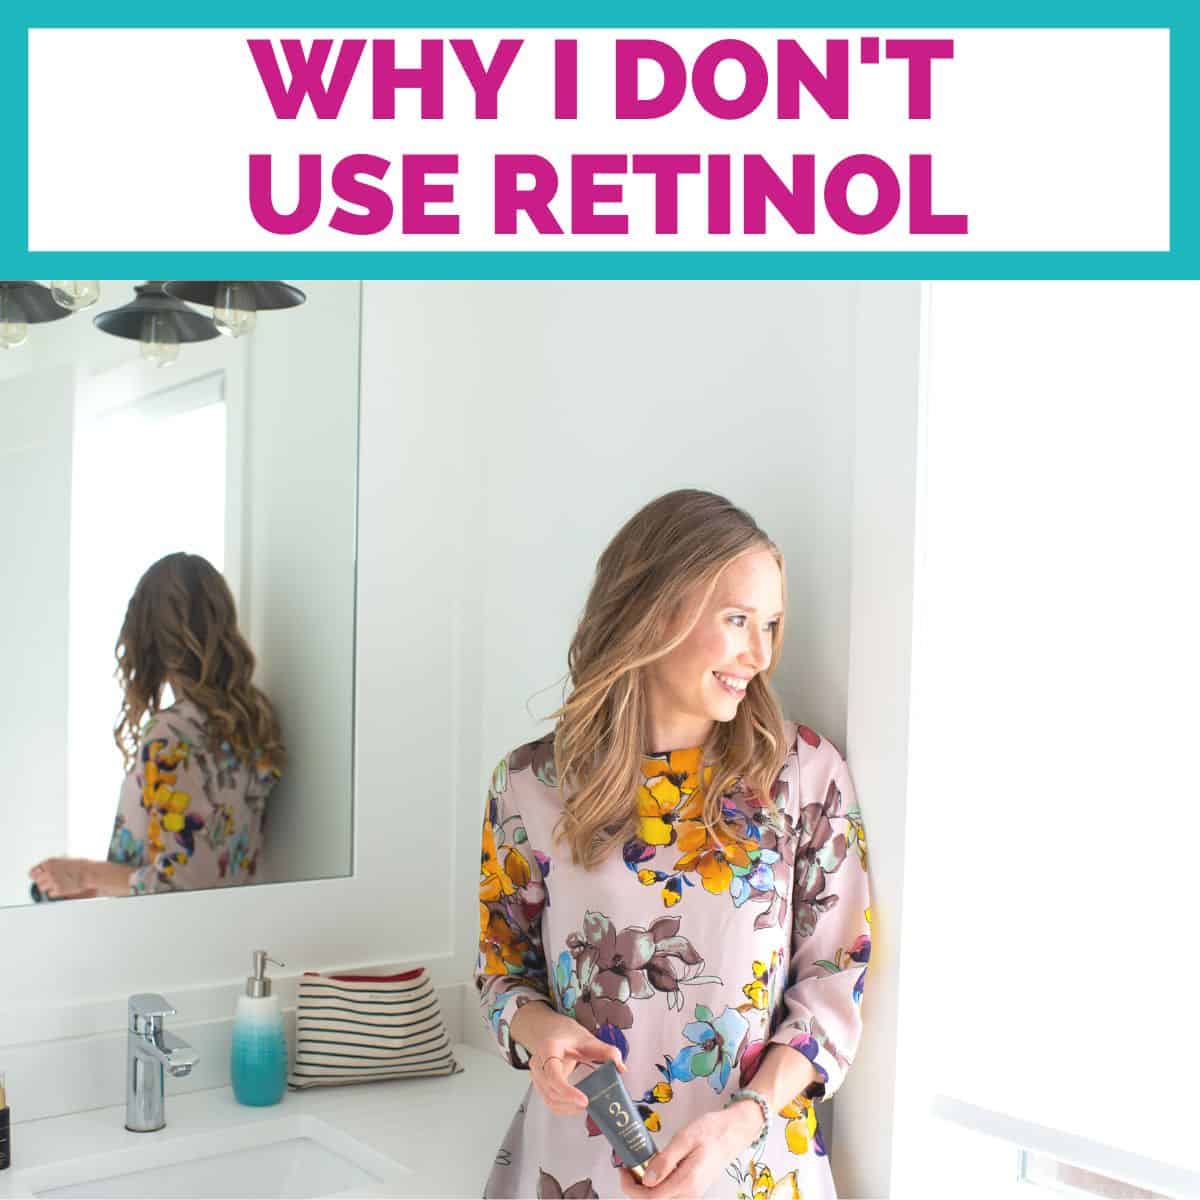 A girl in a pink floral top standing in front of a mirror with the title "why I don't use retinol" above her.